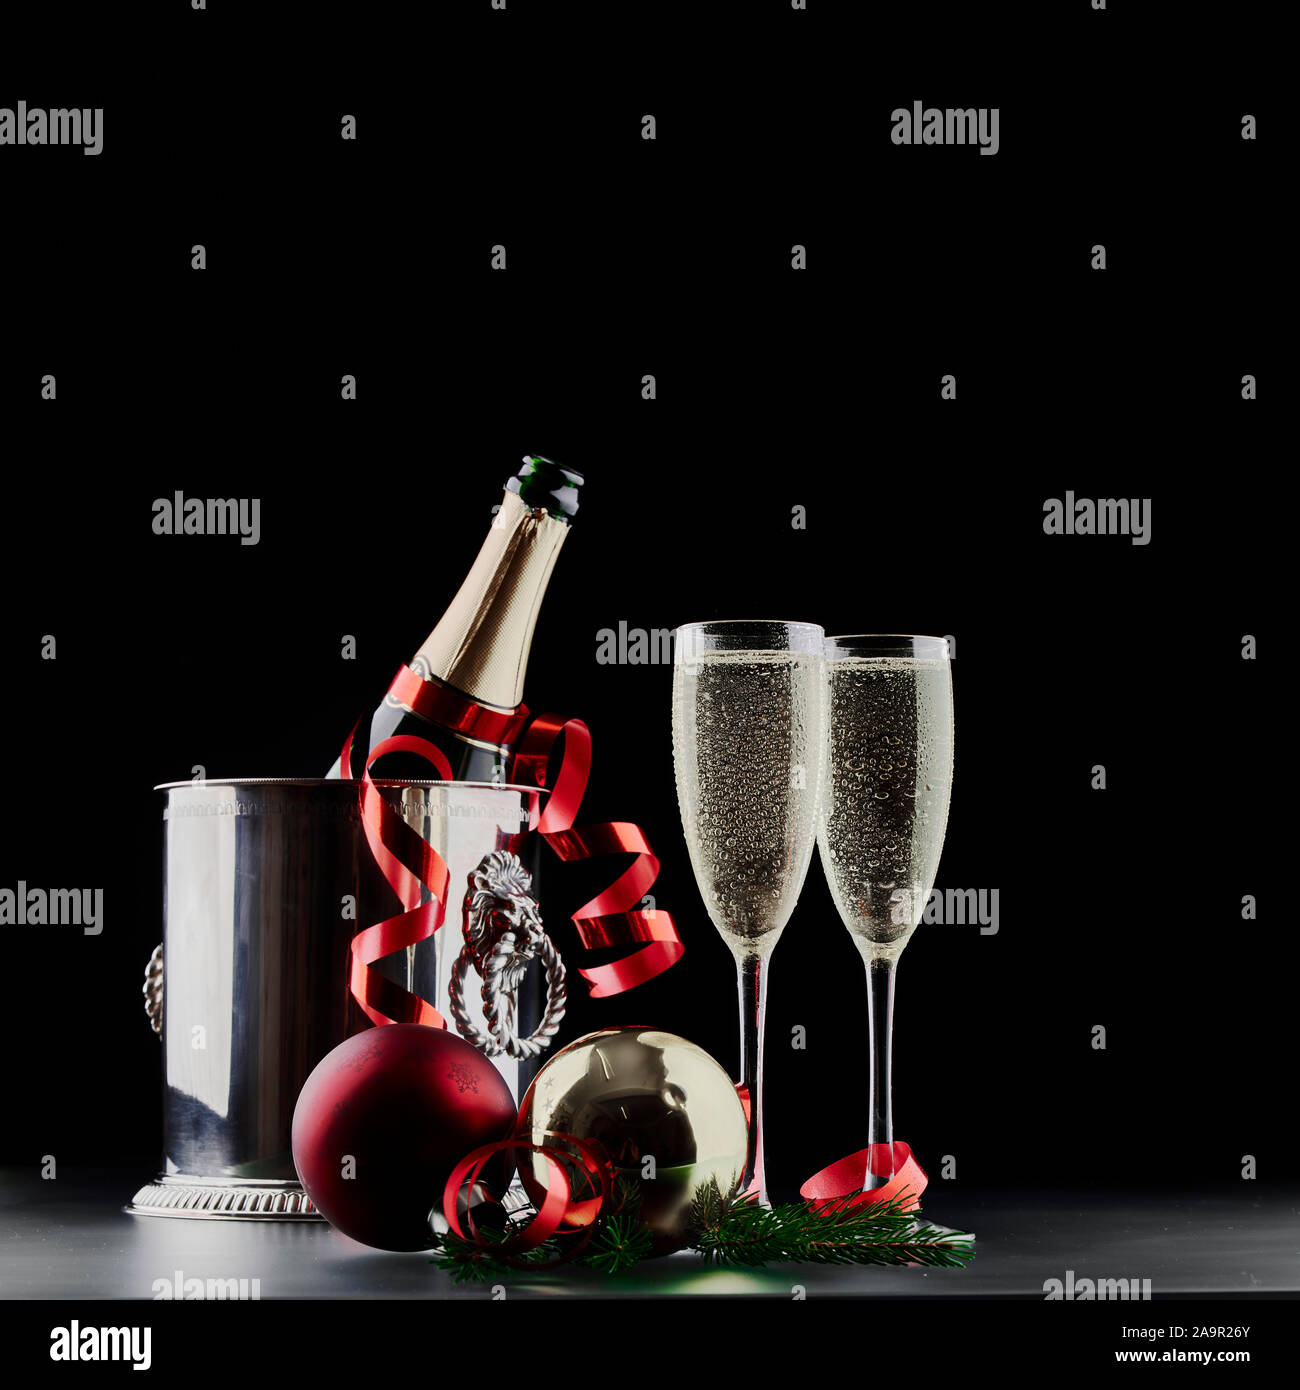 Christmas and New Years Eve celebration concept: two glasses with fizzy drink and a bottle of champagne in ice bucket with festive decorations Stock Photo